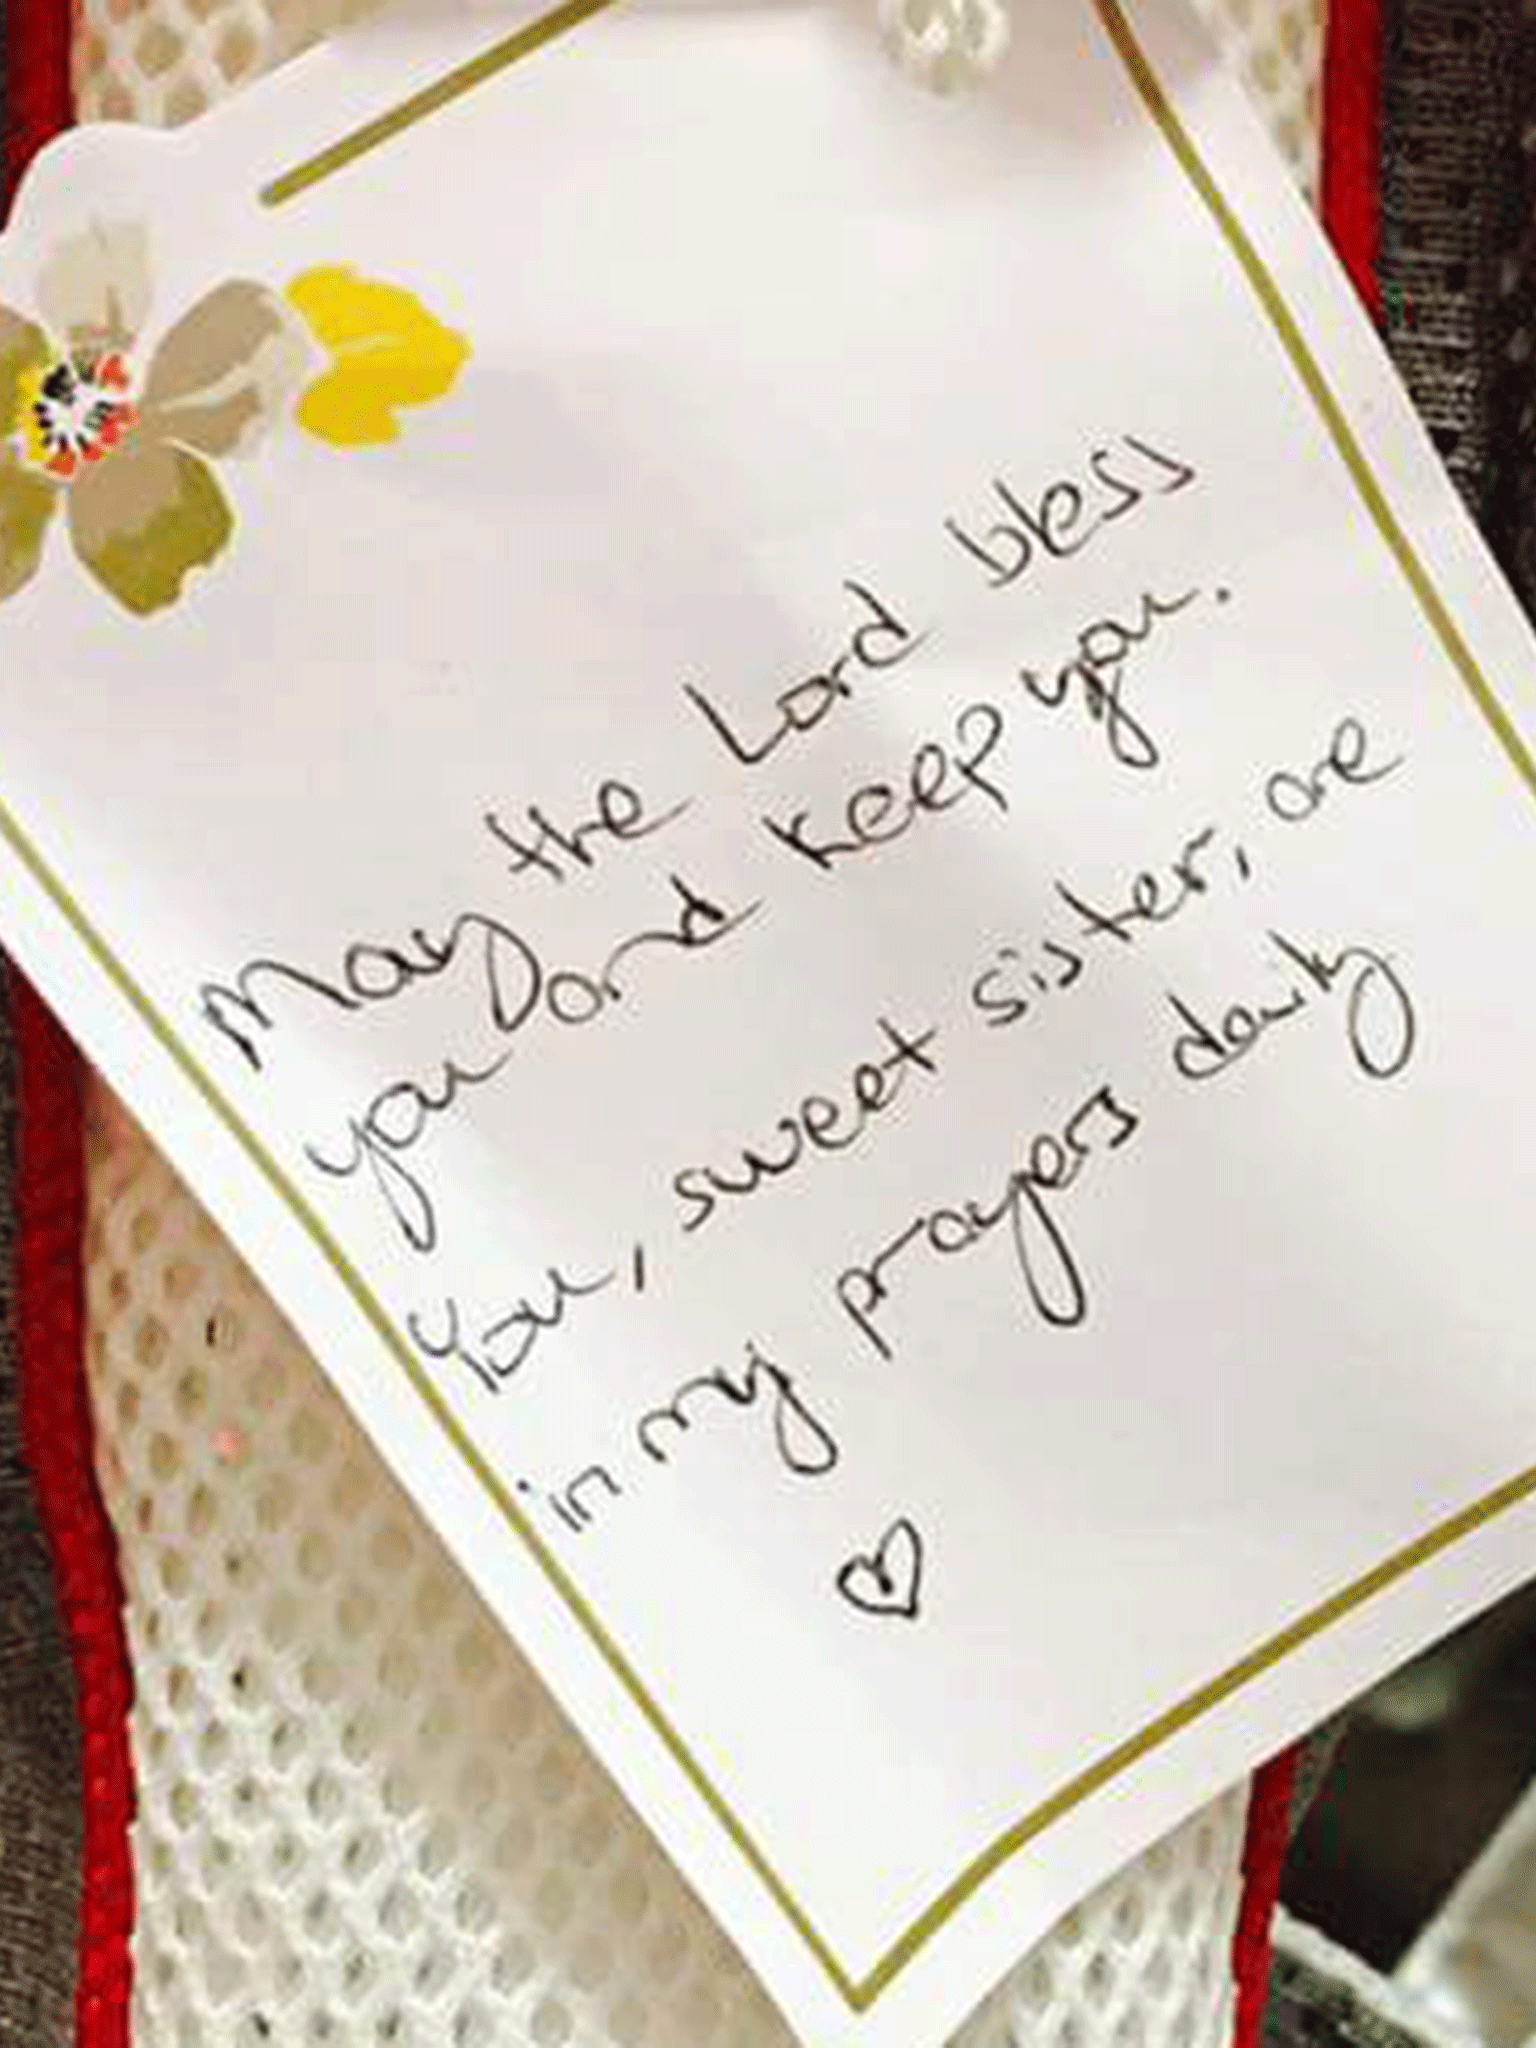 Messages are being left on donated baby carriers